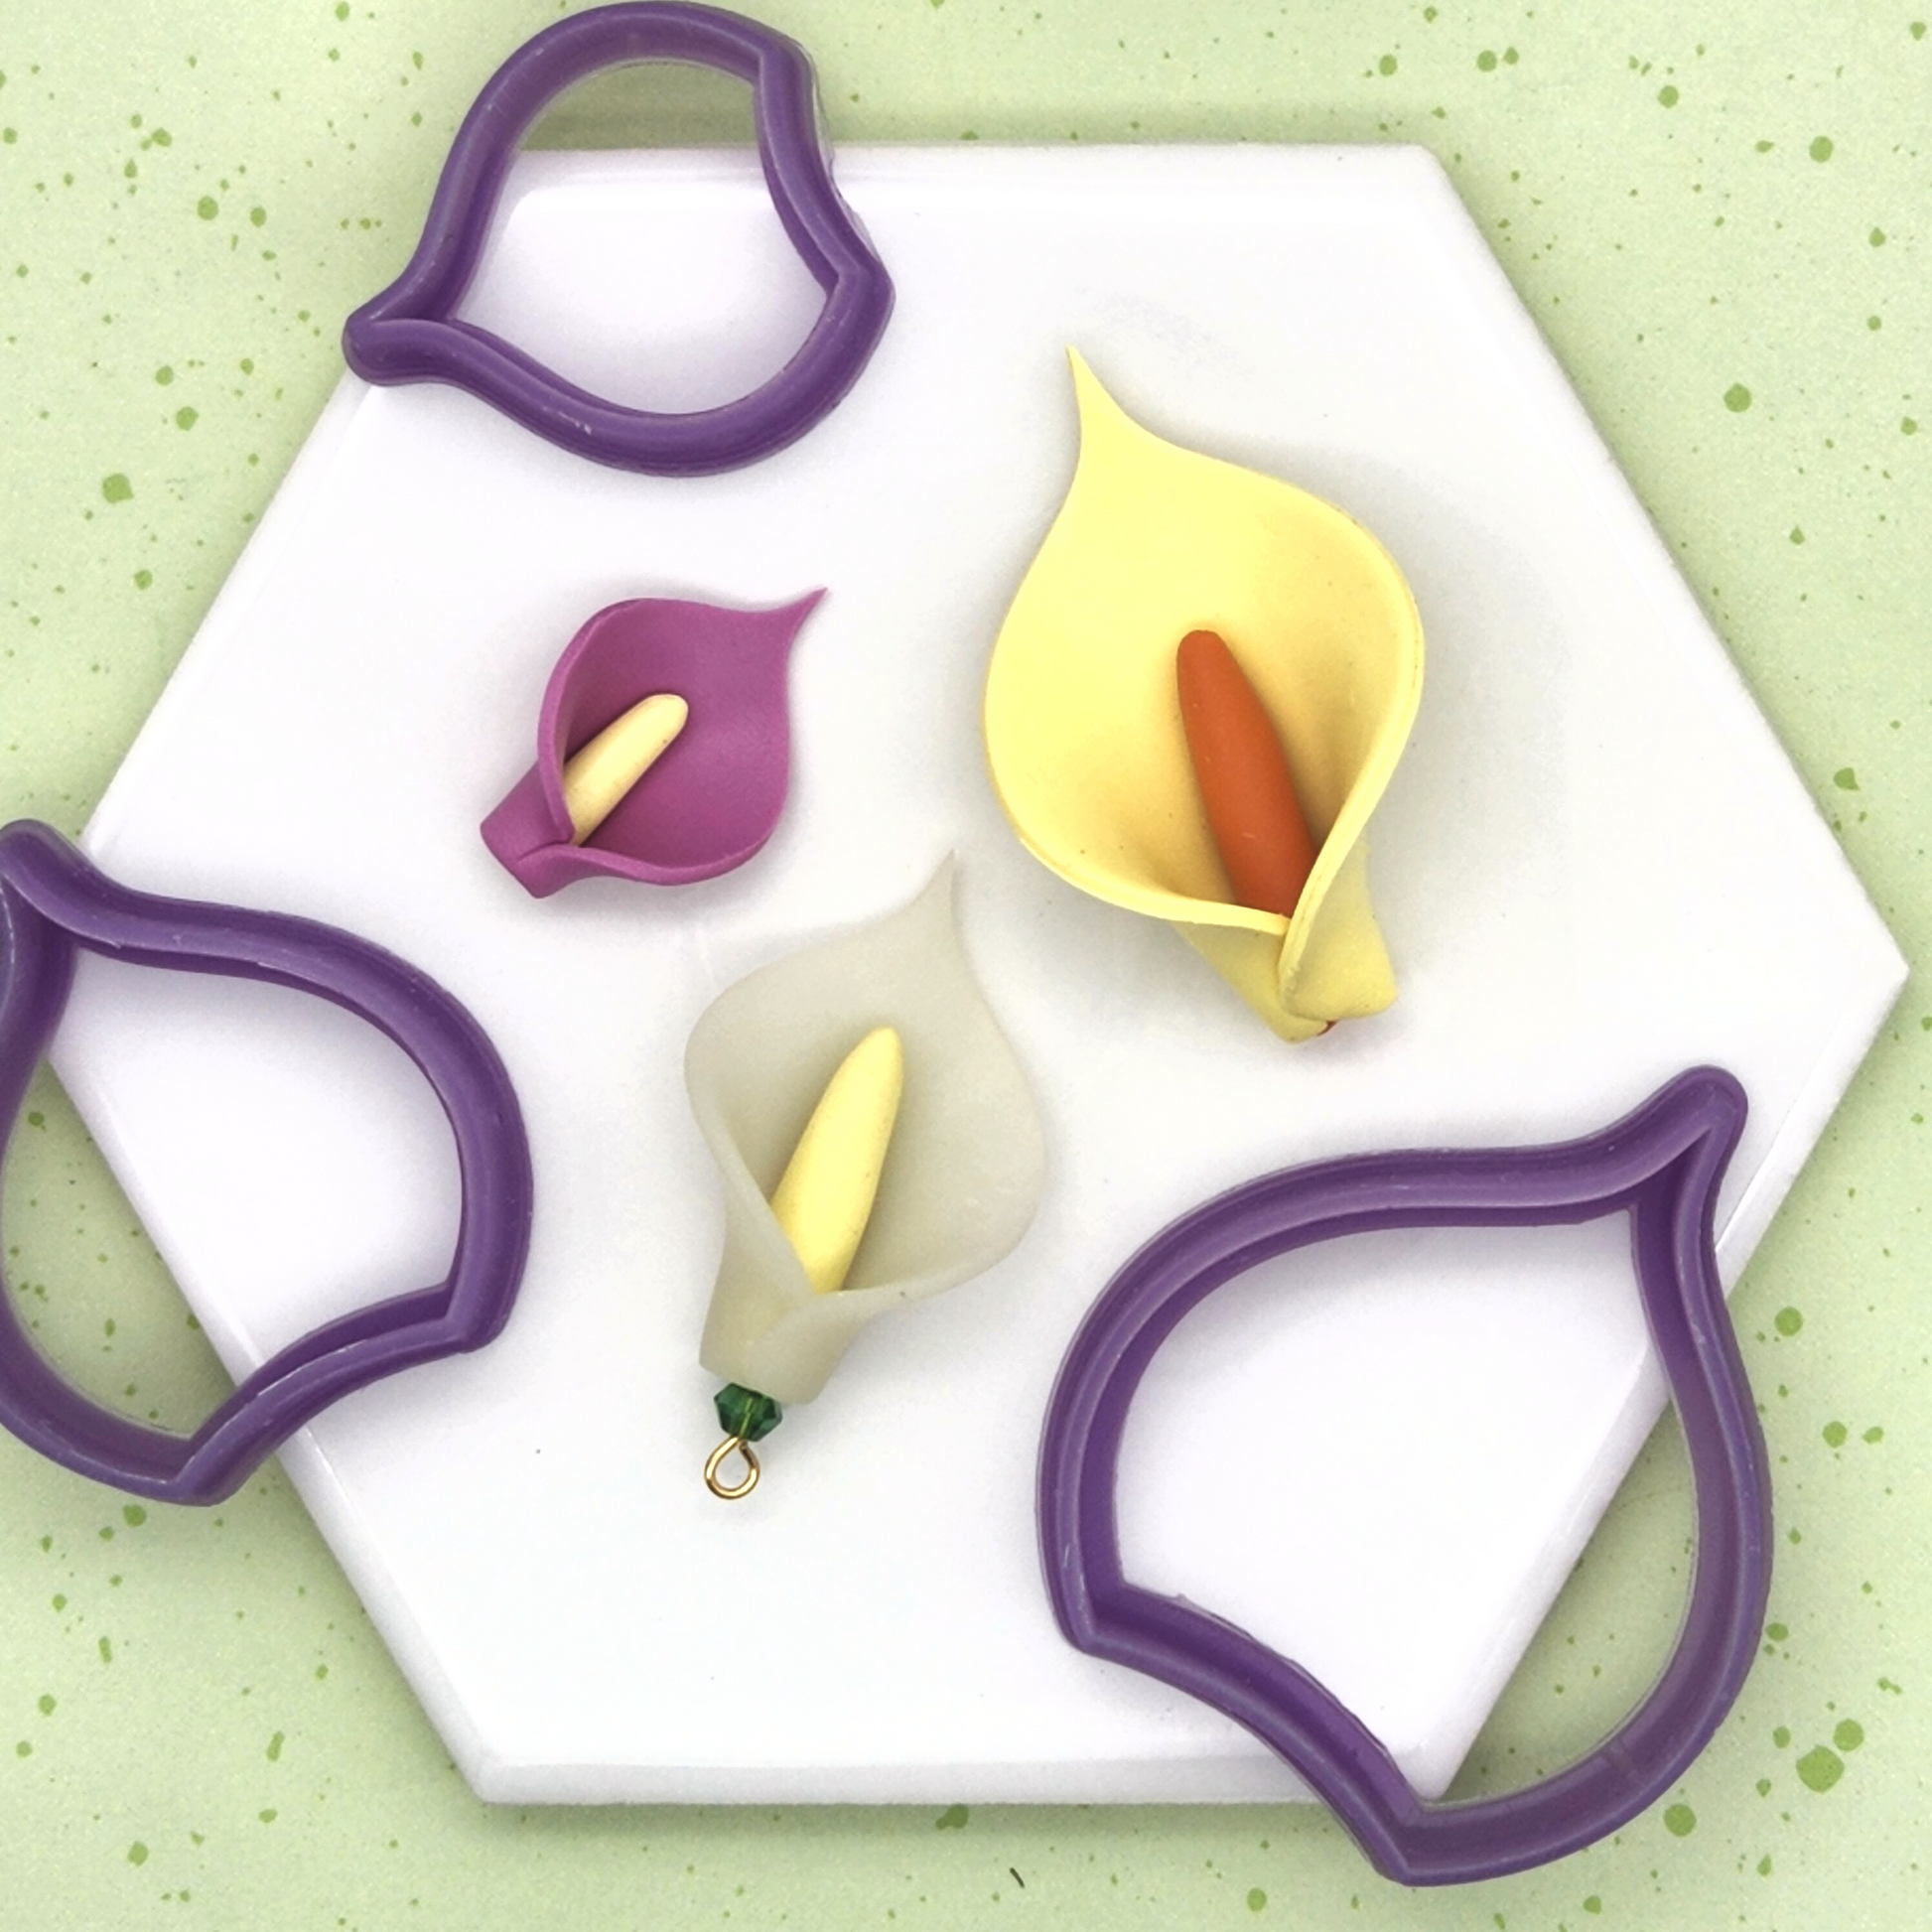 3D Calla Lily polymer clay. 3D Calla Lily petal polymer clay cutters in three available sizes